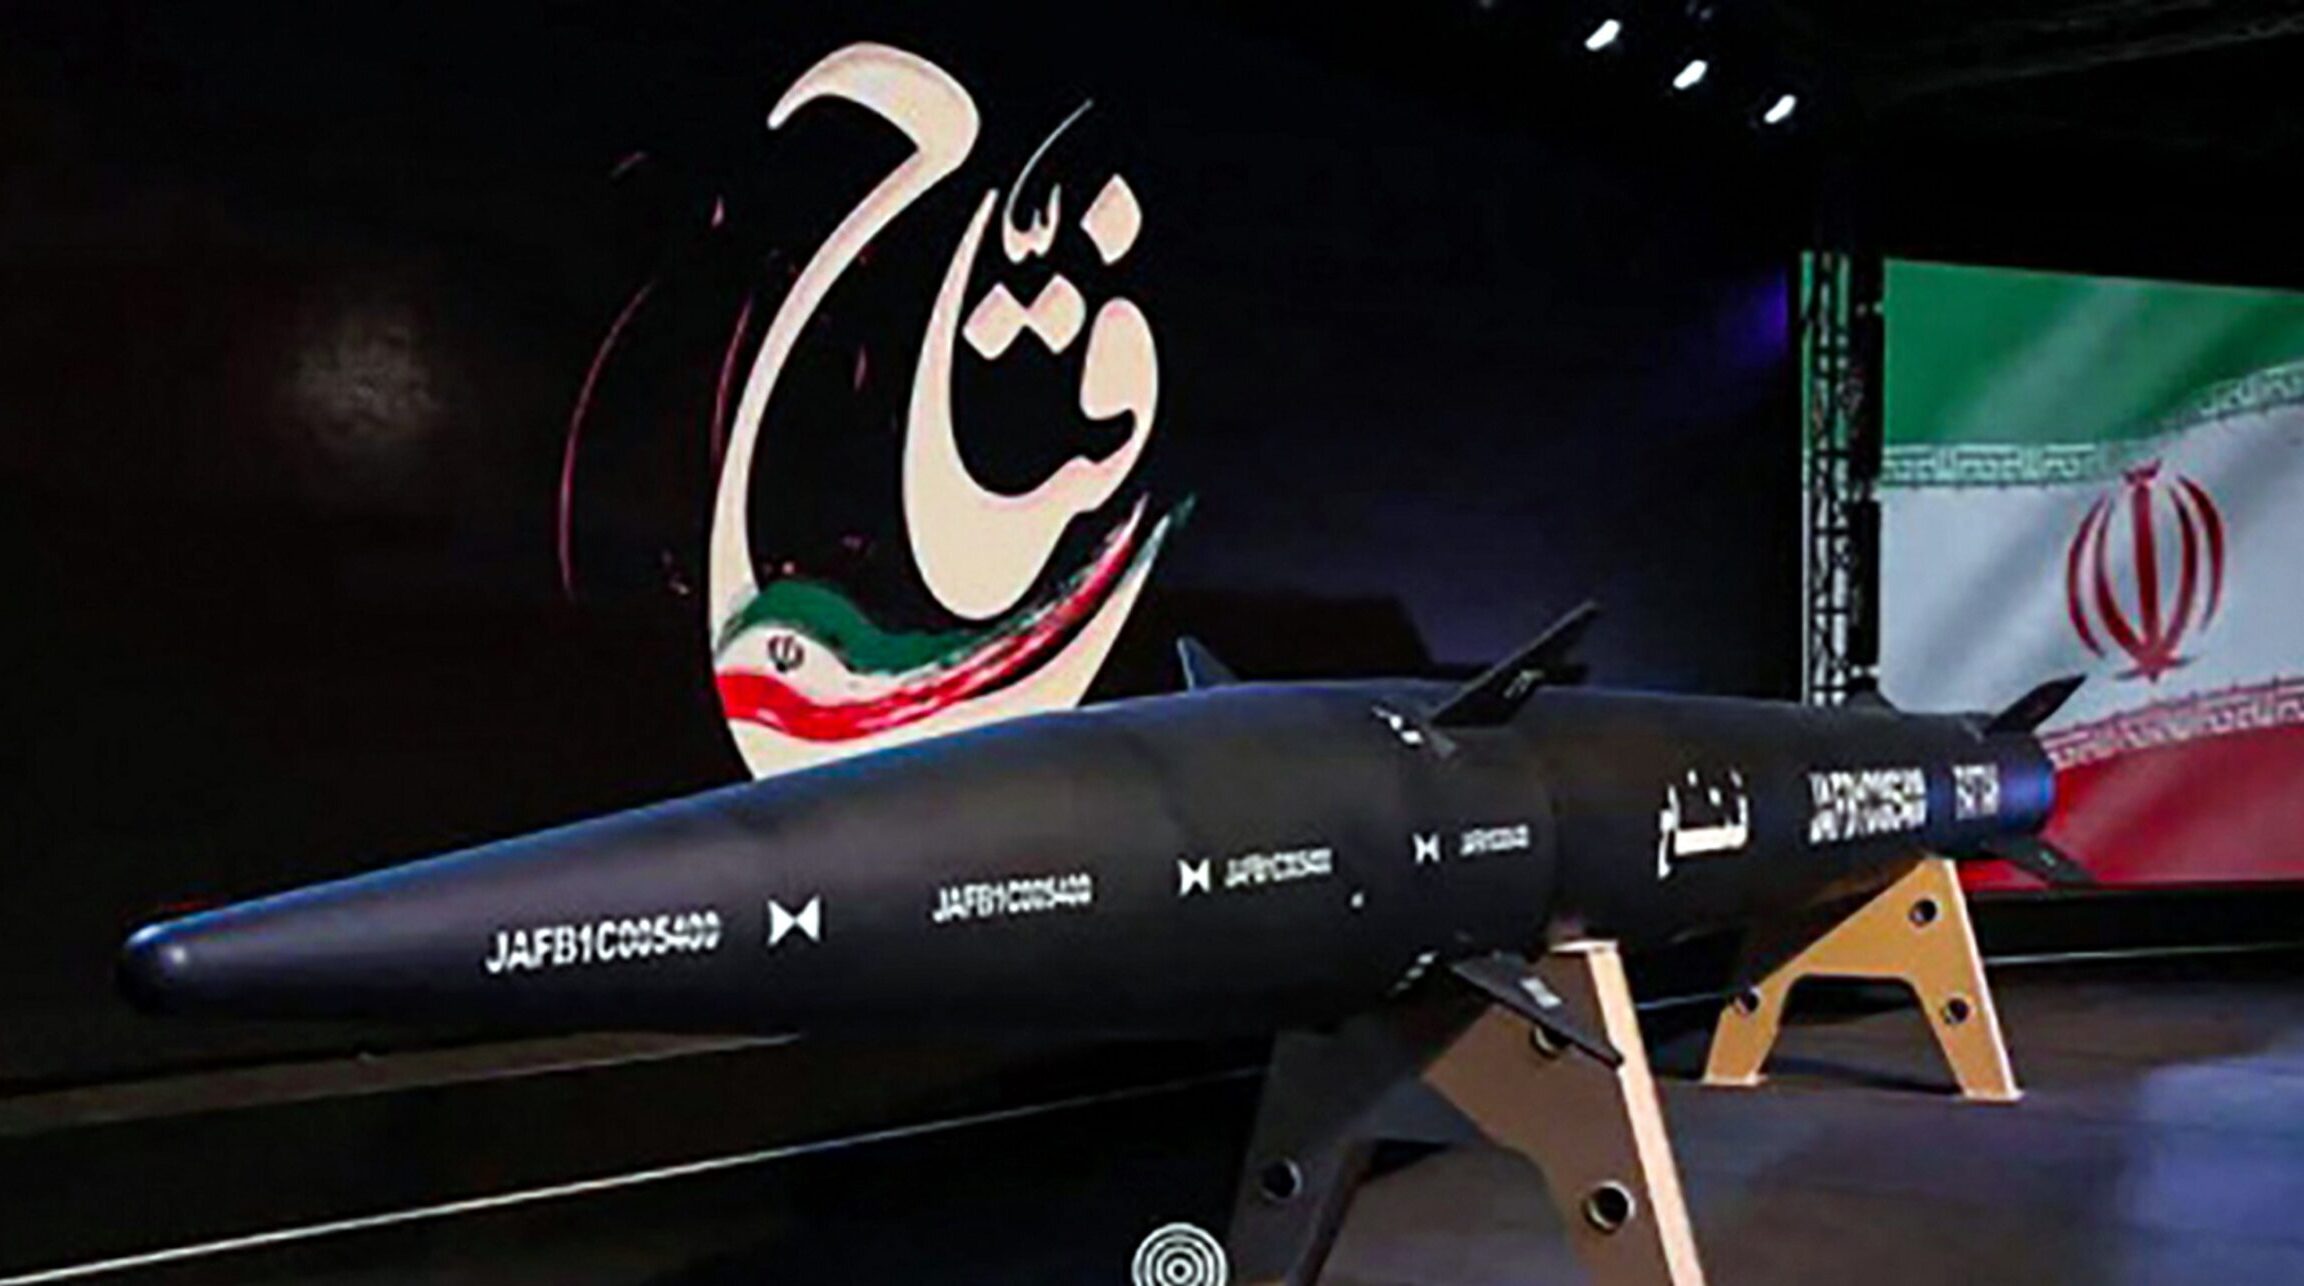 Iran Unveils First Domestically Made Hypersonic Missile, Sparking Western Concerns